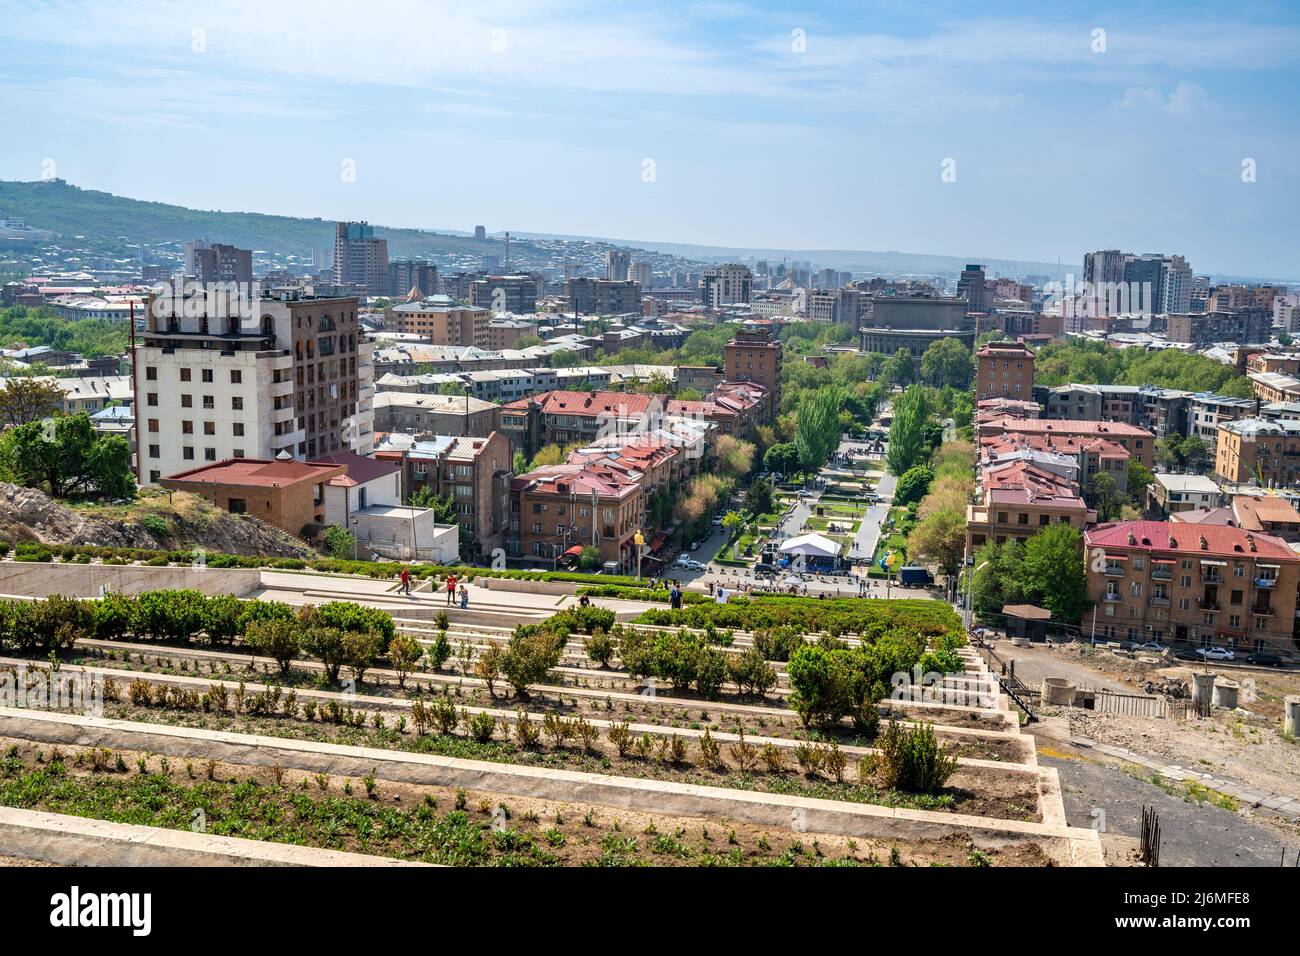 Yerevan, Armenia - April 30, 2022 - Yerevan city aerial view seen from the top of Casecade Complex in Yerevan, Armenia on a bright sunny day Stock Photo